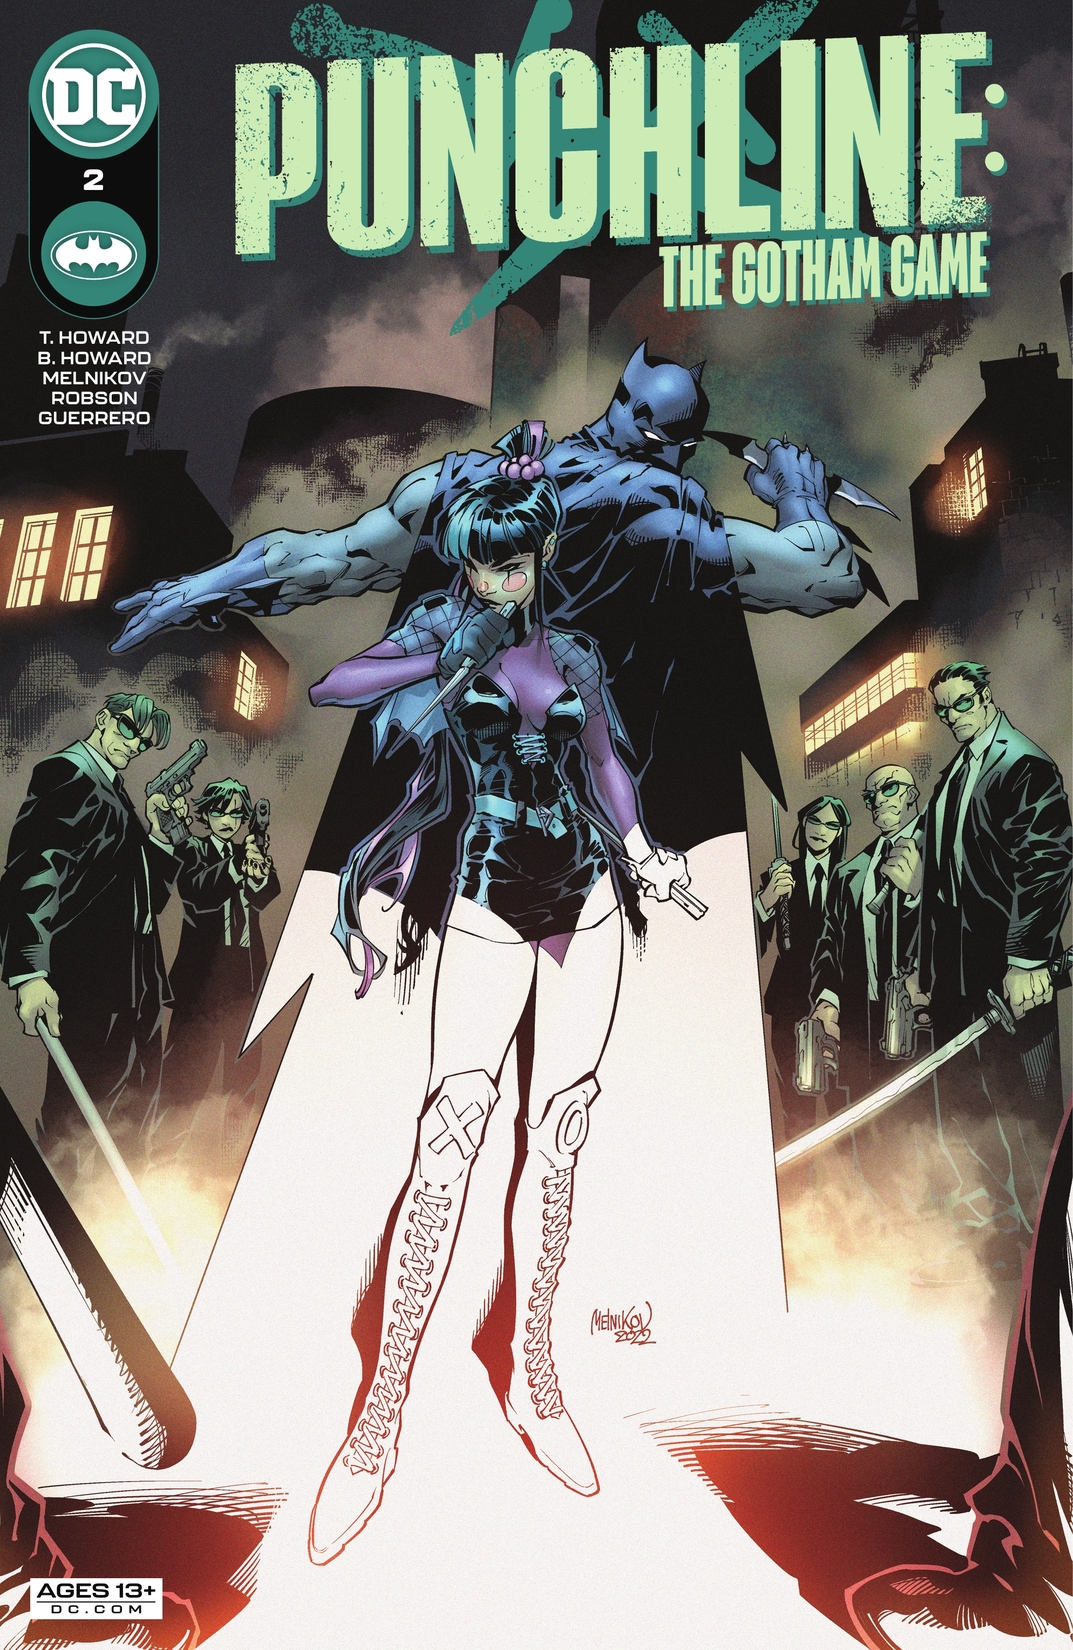 Punchline: The Gotham Game #2 preview images